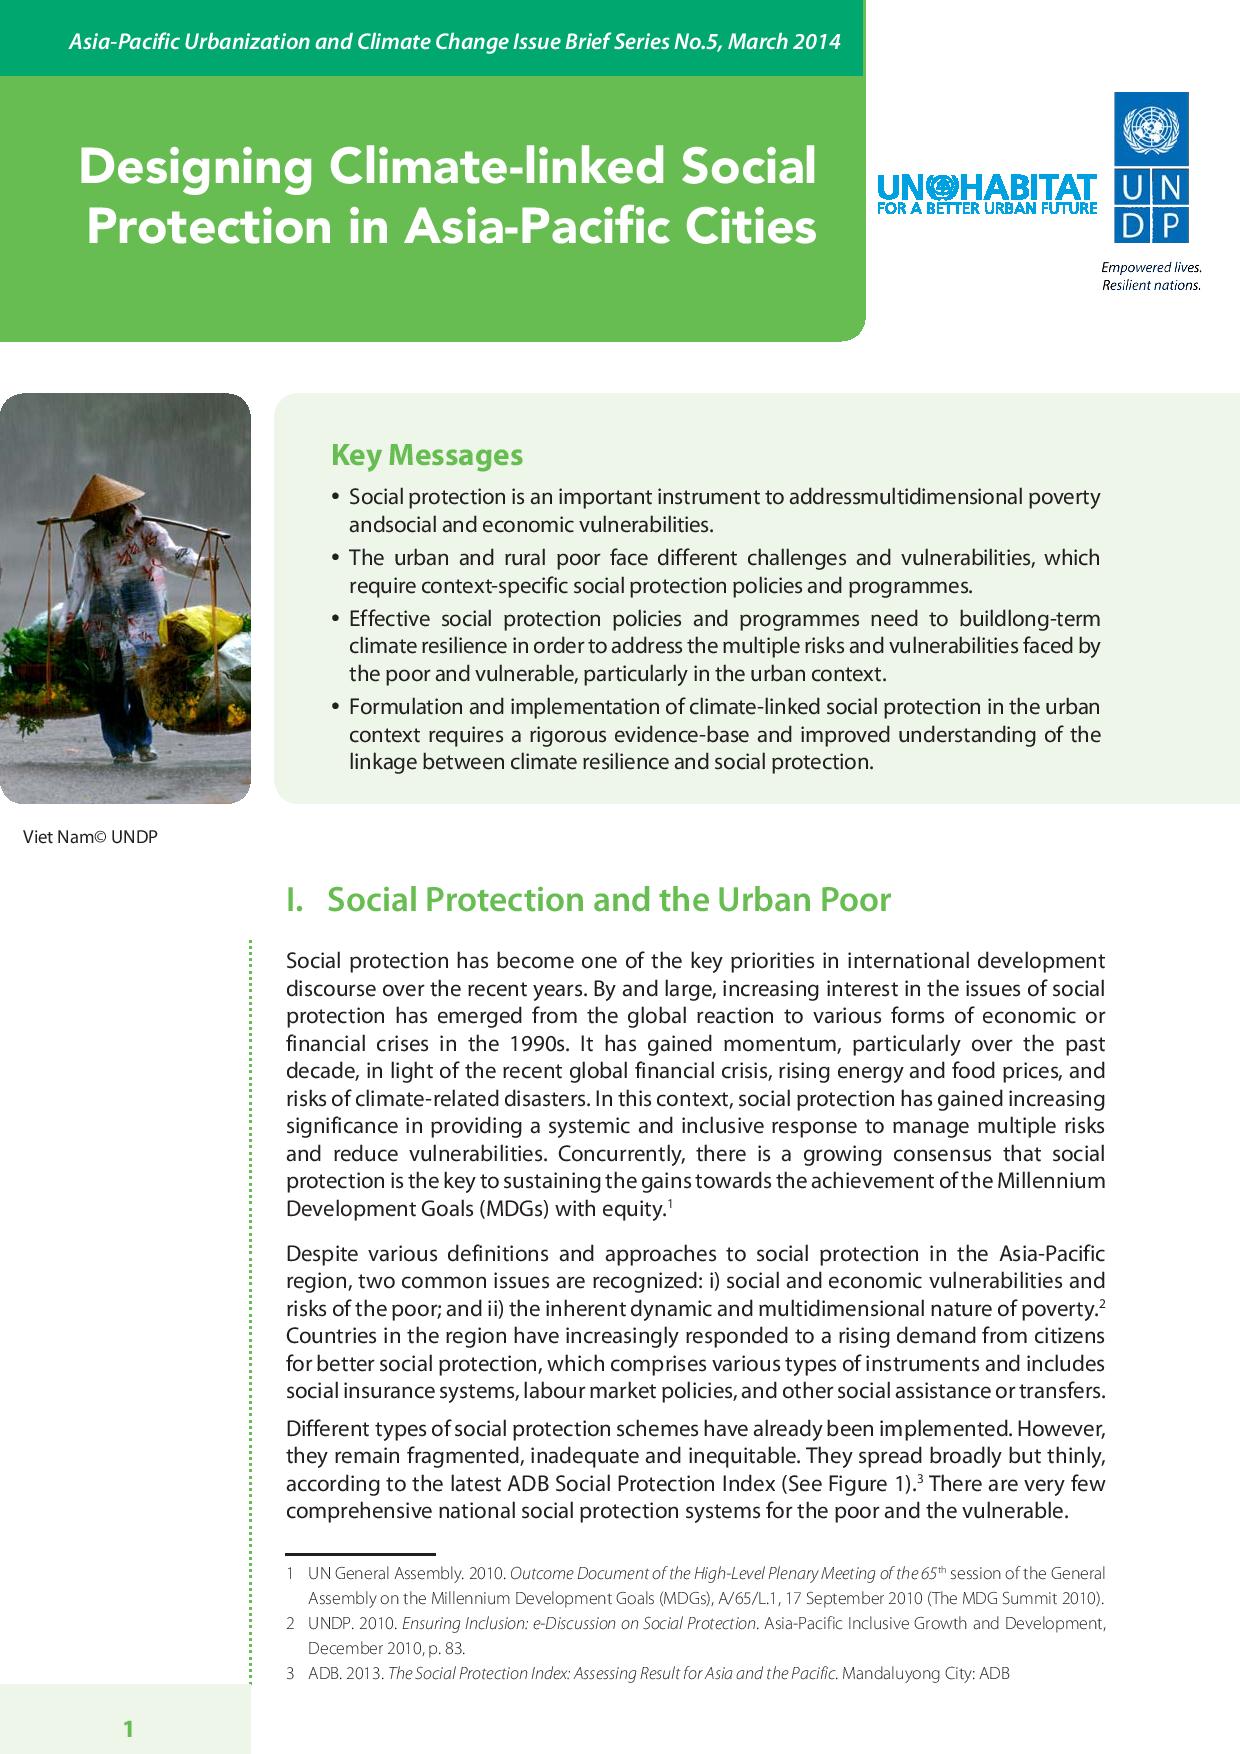 No. 5: The Asia-Pacific Issue Brief Series on Urbanization and Climate Change (March 2014)